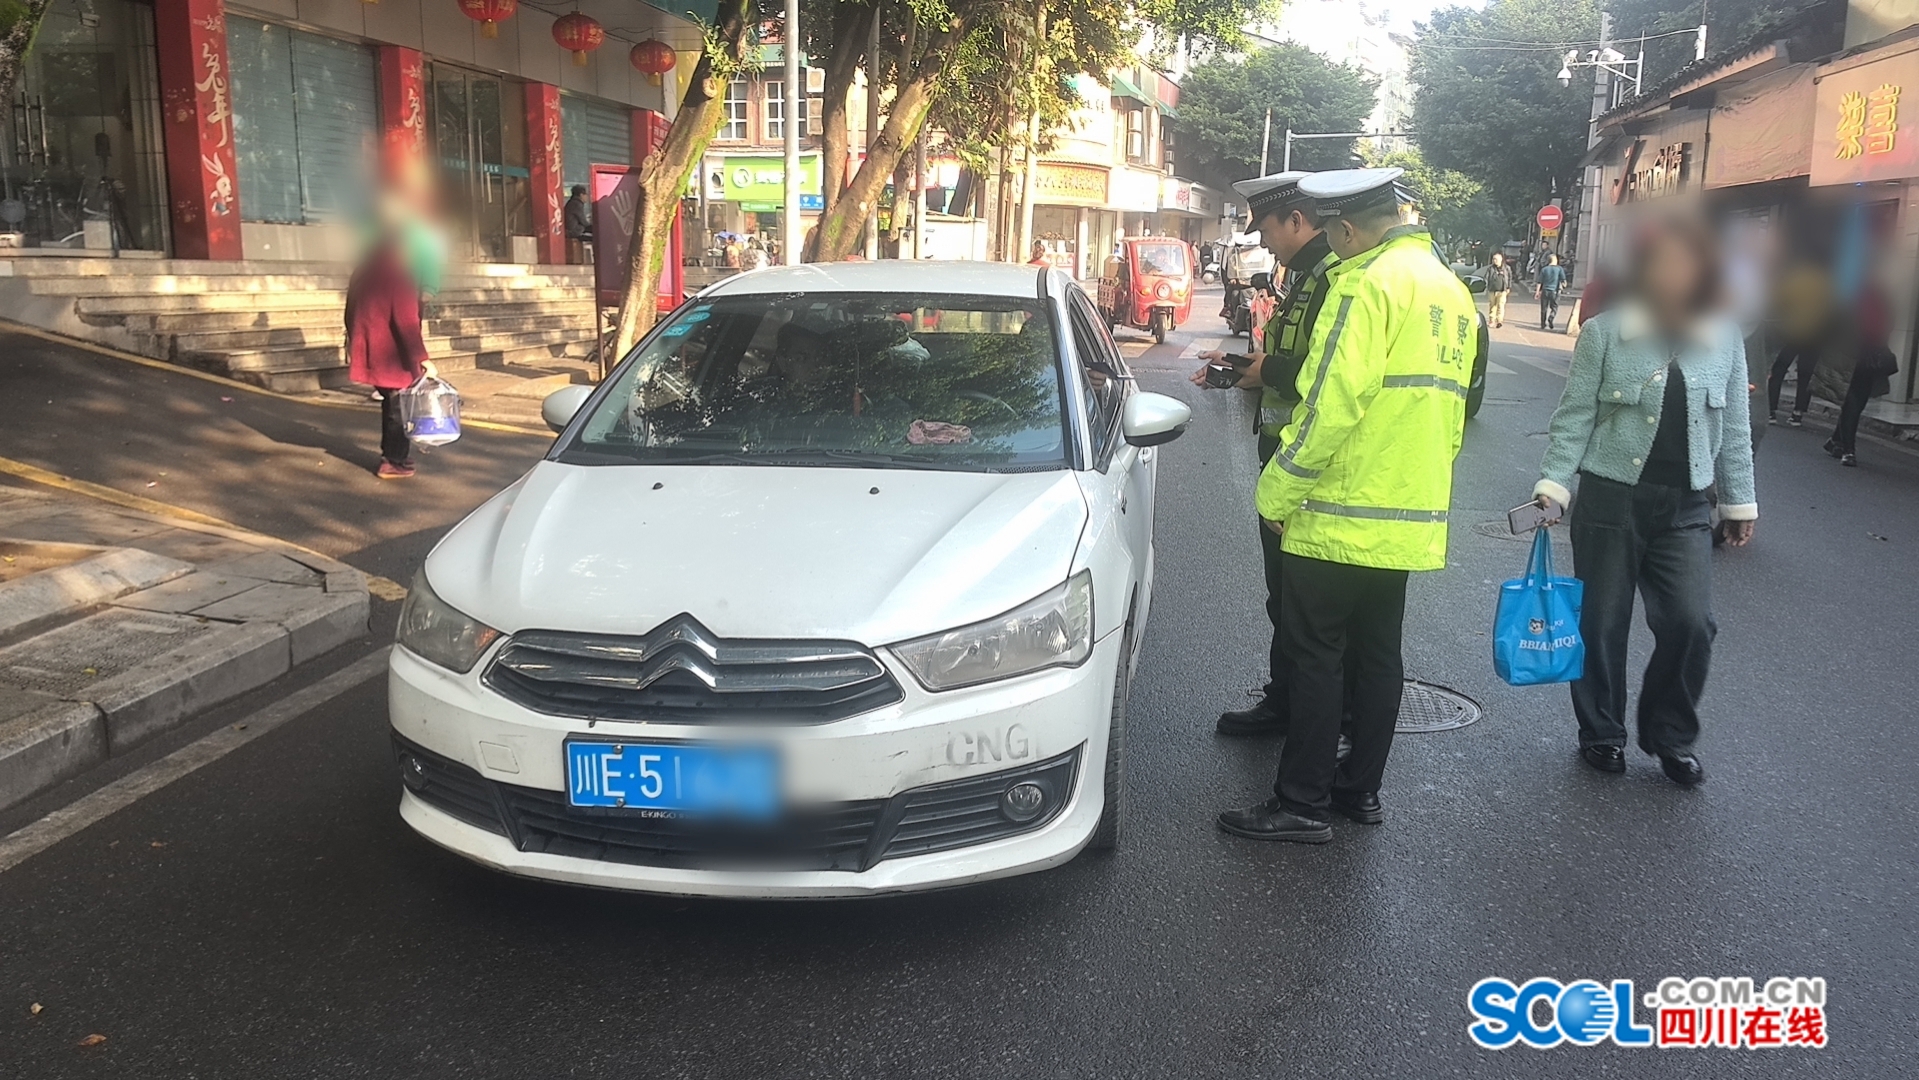 In winter, Luzhou public security traffic police strictly investigate the safety of drunk driving